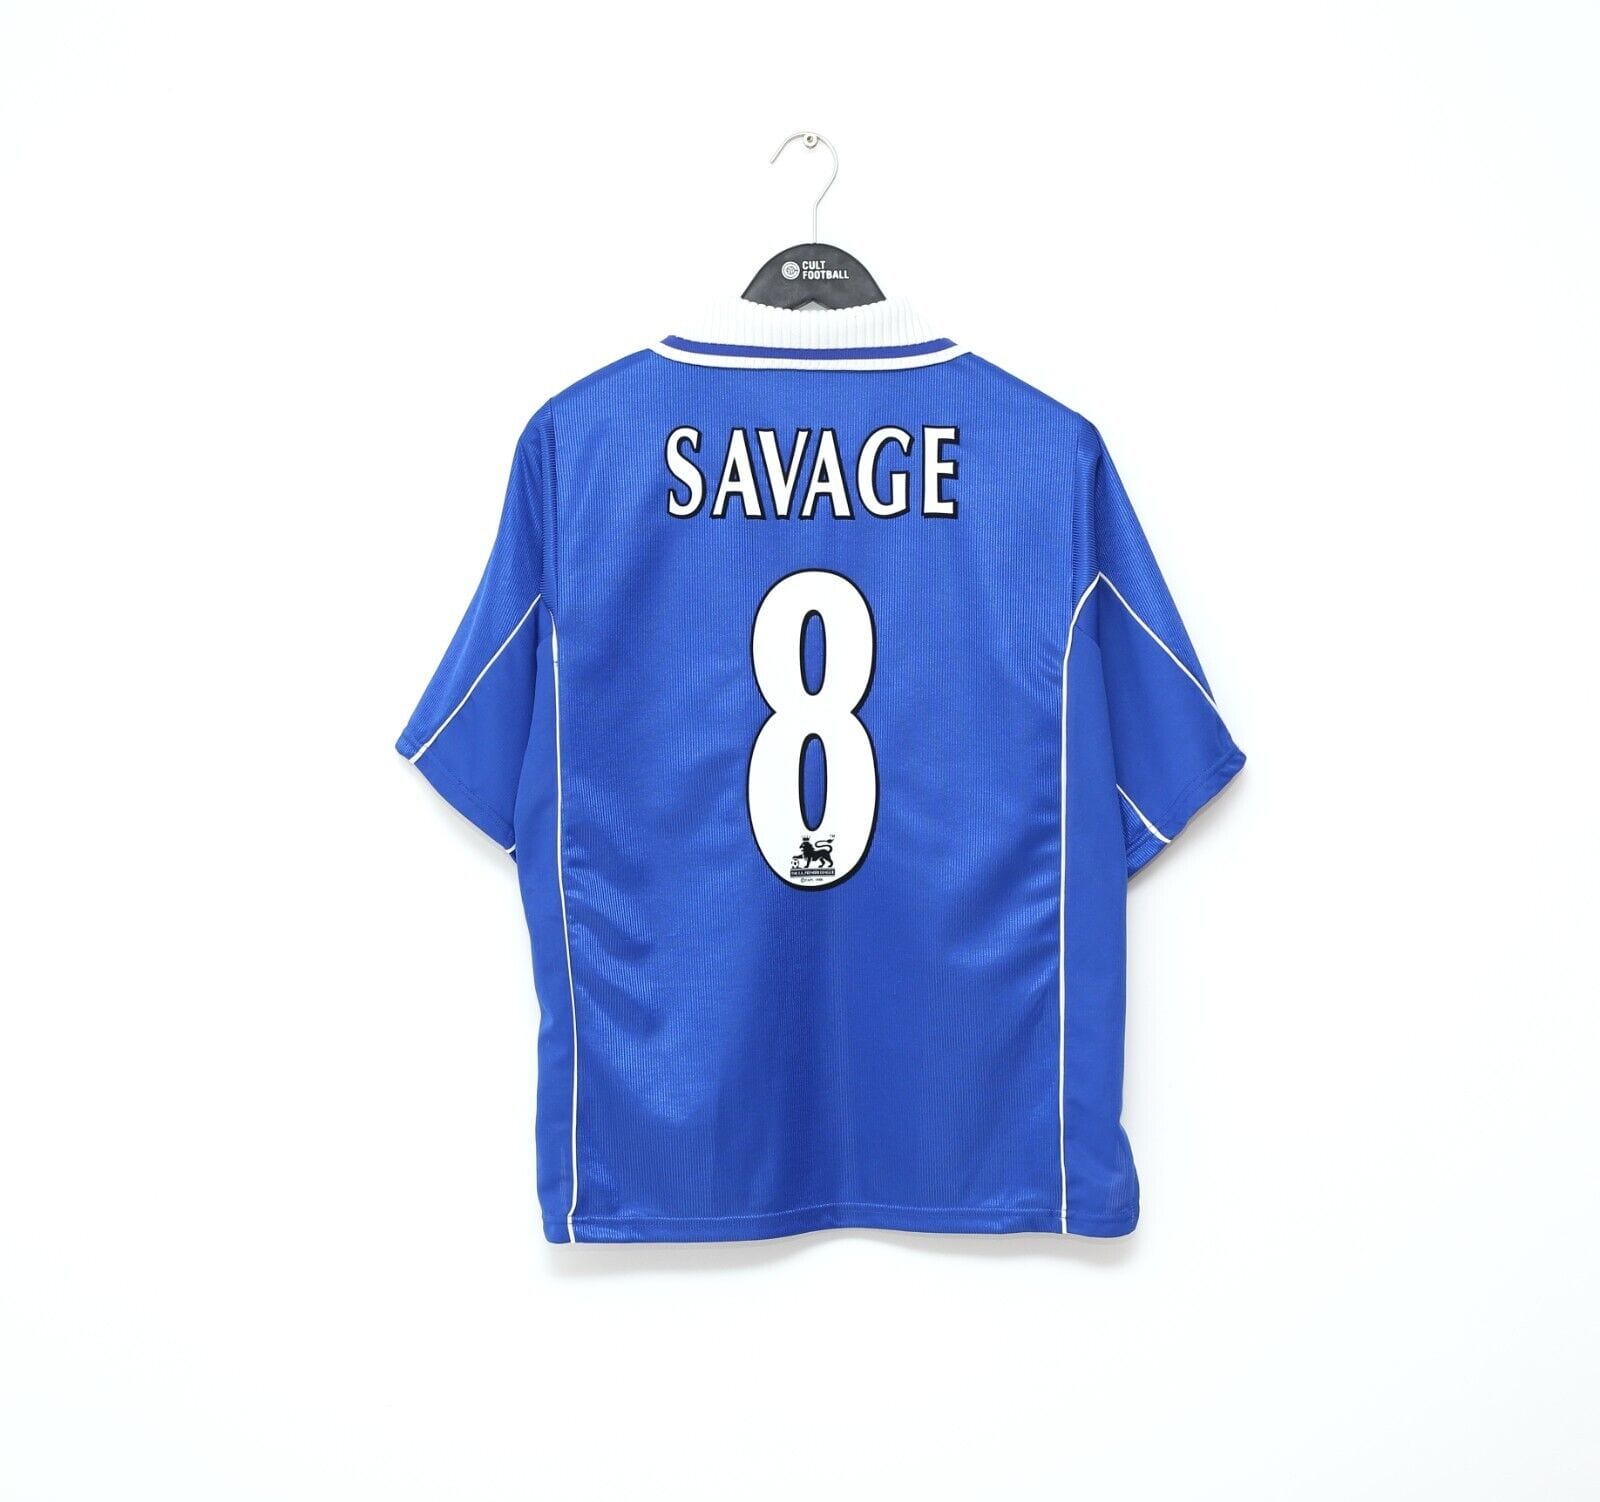 2001/02 SAVAGE #8 Leicester City Vintage LCS Home Football Shirt (M)